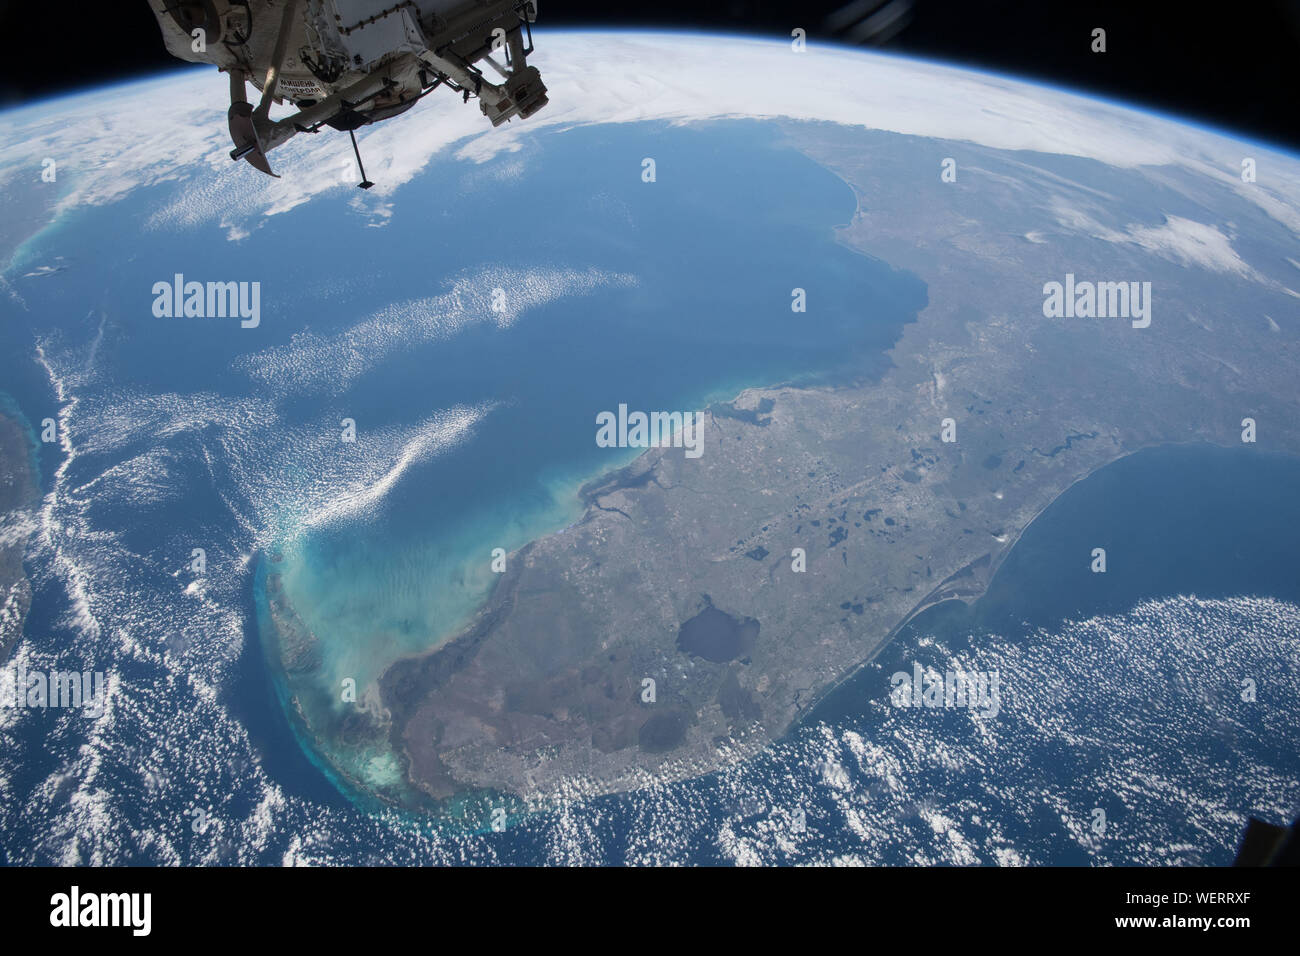 The U.S. State of Florida with the entire peninsular in view as seen by astronauts onboard the International Space Station March 7, 2017 in Earth Orbit. Stock Photo